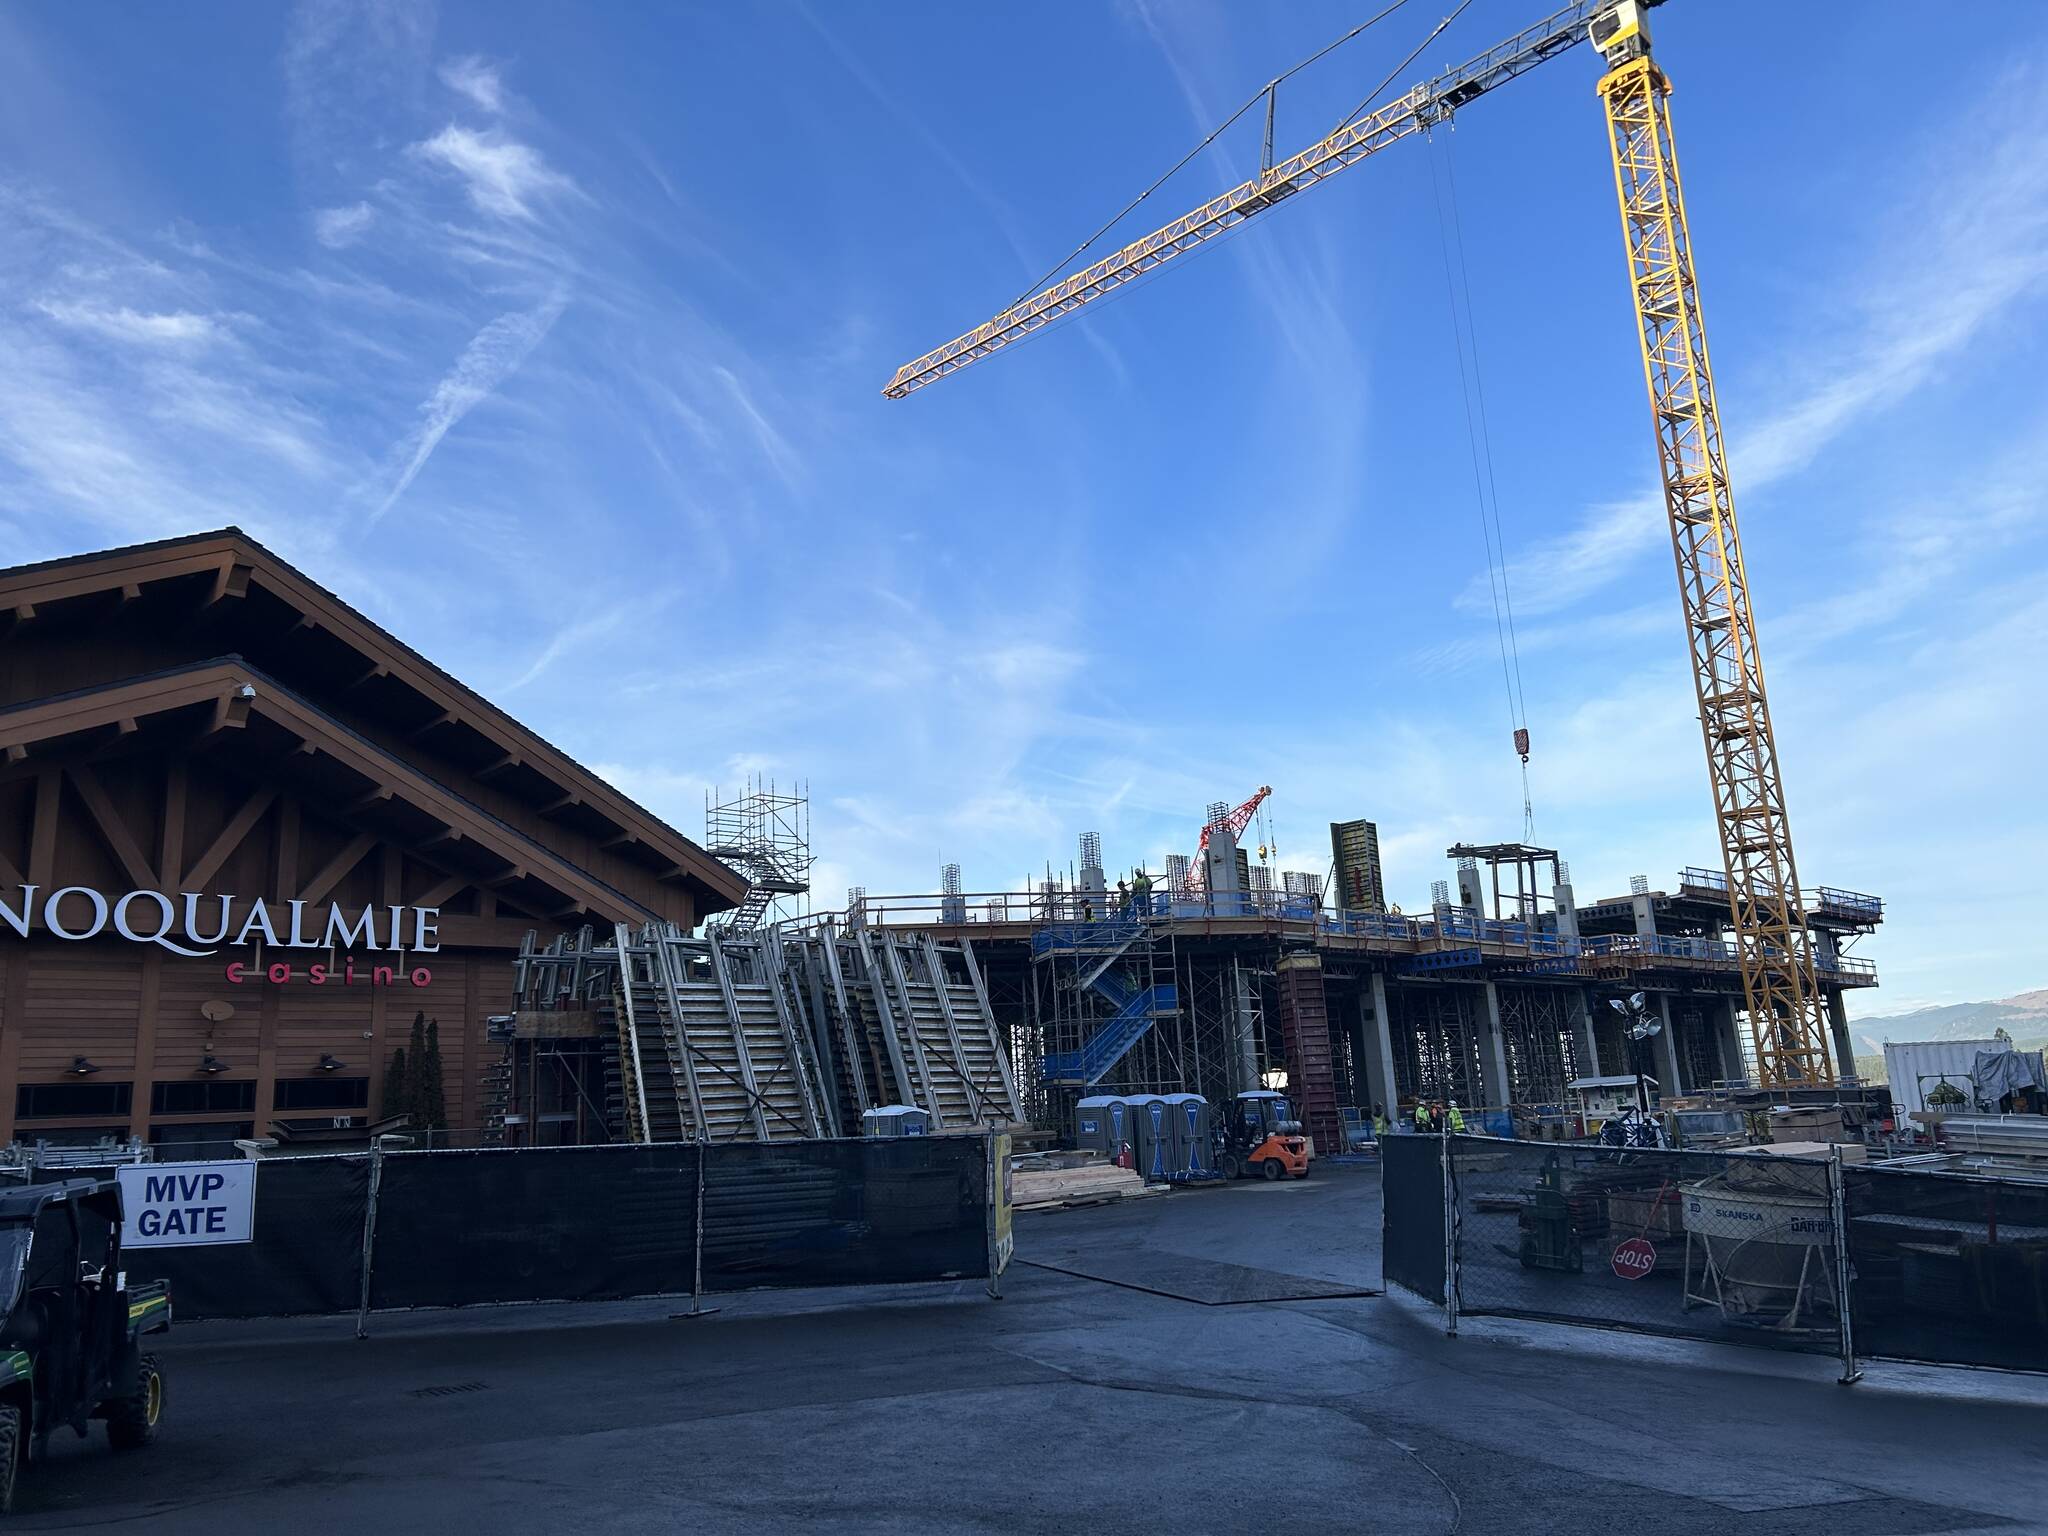 Construction has moved swiftly through the multi-phase project at Snoqualmie Casino since the groundbreaking in 2022. (Cameron Sires/Sound Publishing)